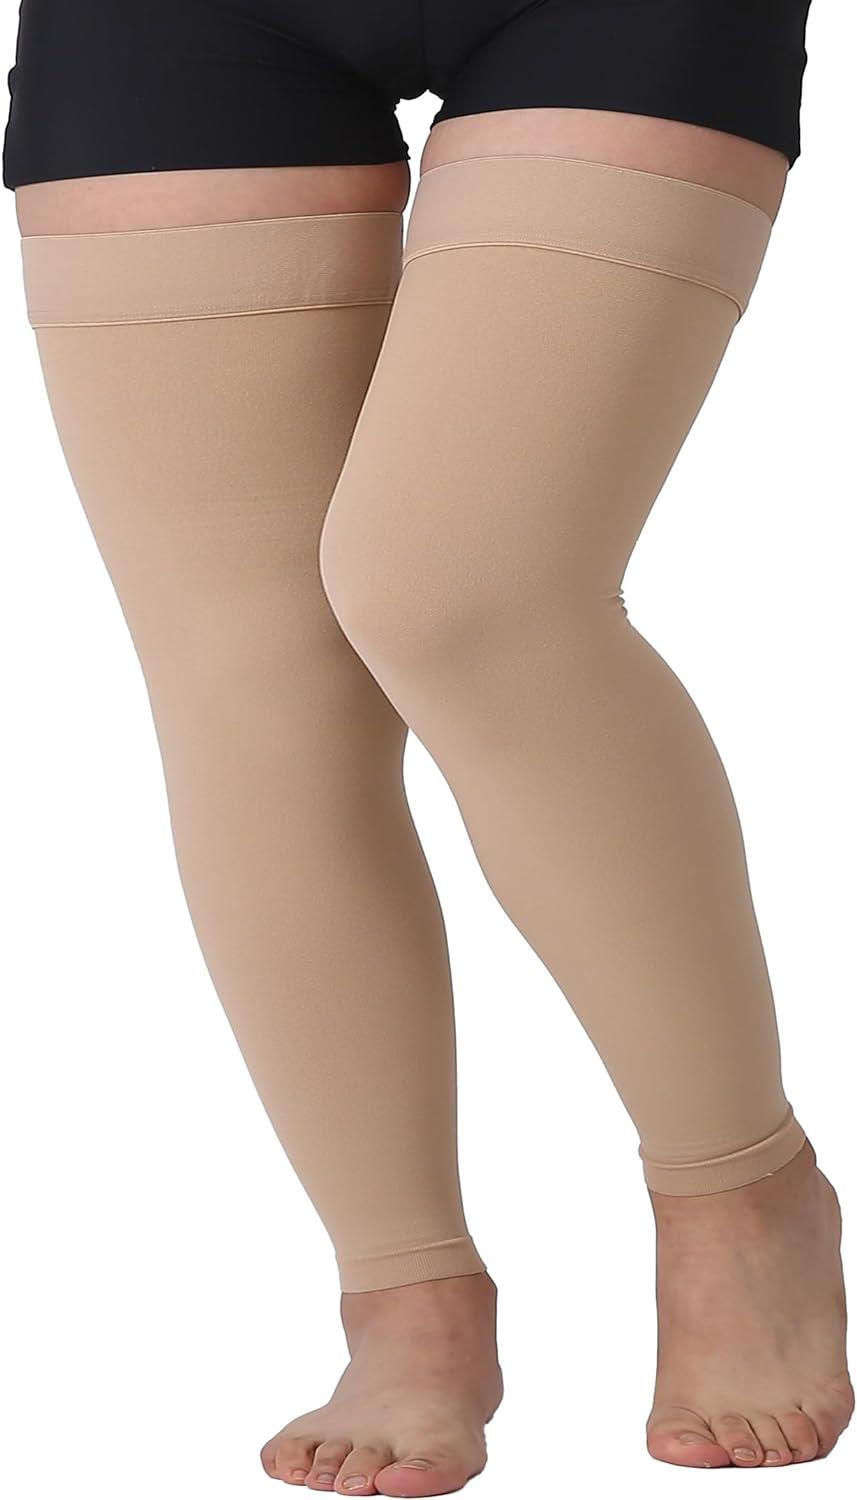 TOFLY Thigh High Compression Stockings Opaque 1 Pair Firm Support 20-30  mmHg Gradient Compression with Silicone Band Footless Compression Sleeves  Treatment Swelling Varicose Veins Edema. M 15-20mmhg Beige